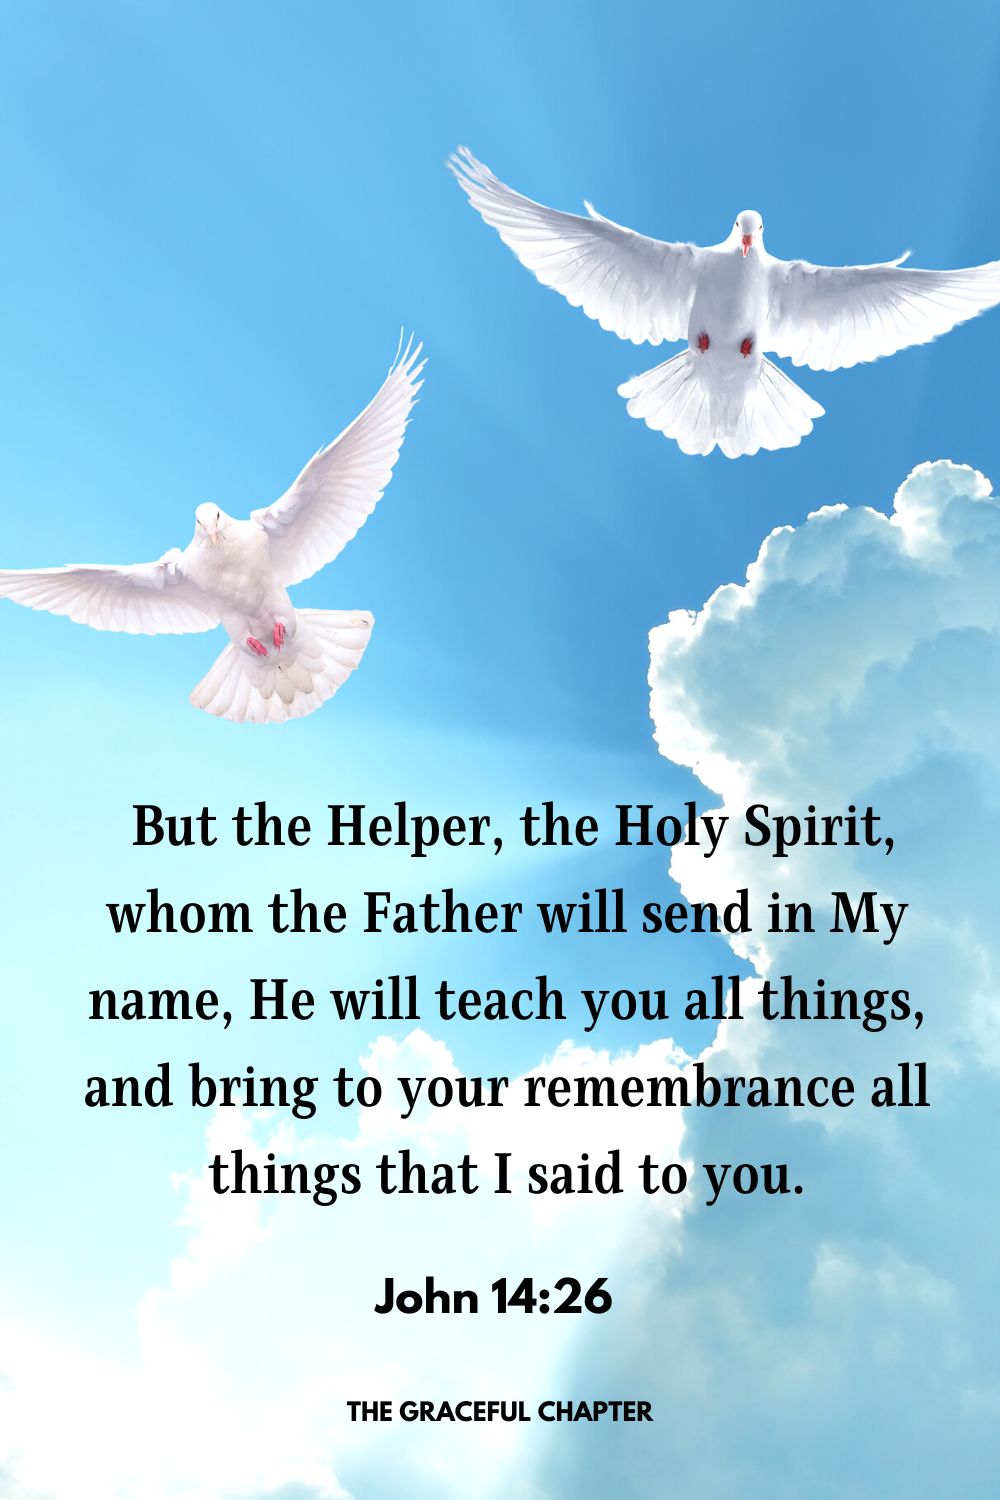  But the Helper, the Holy Spirit, whom the Father will send in My name, He will teach you all things, and bring to your remembrance all things that I said to you.John 14:26 